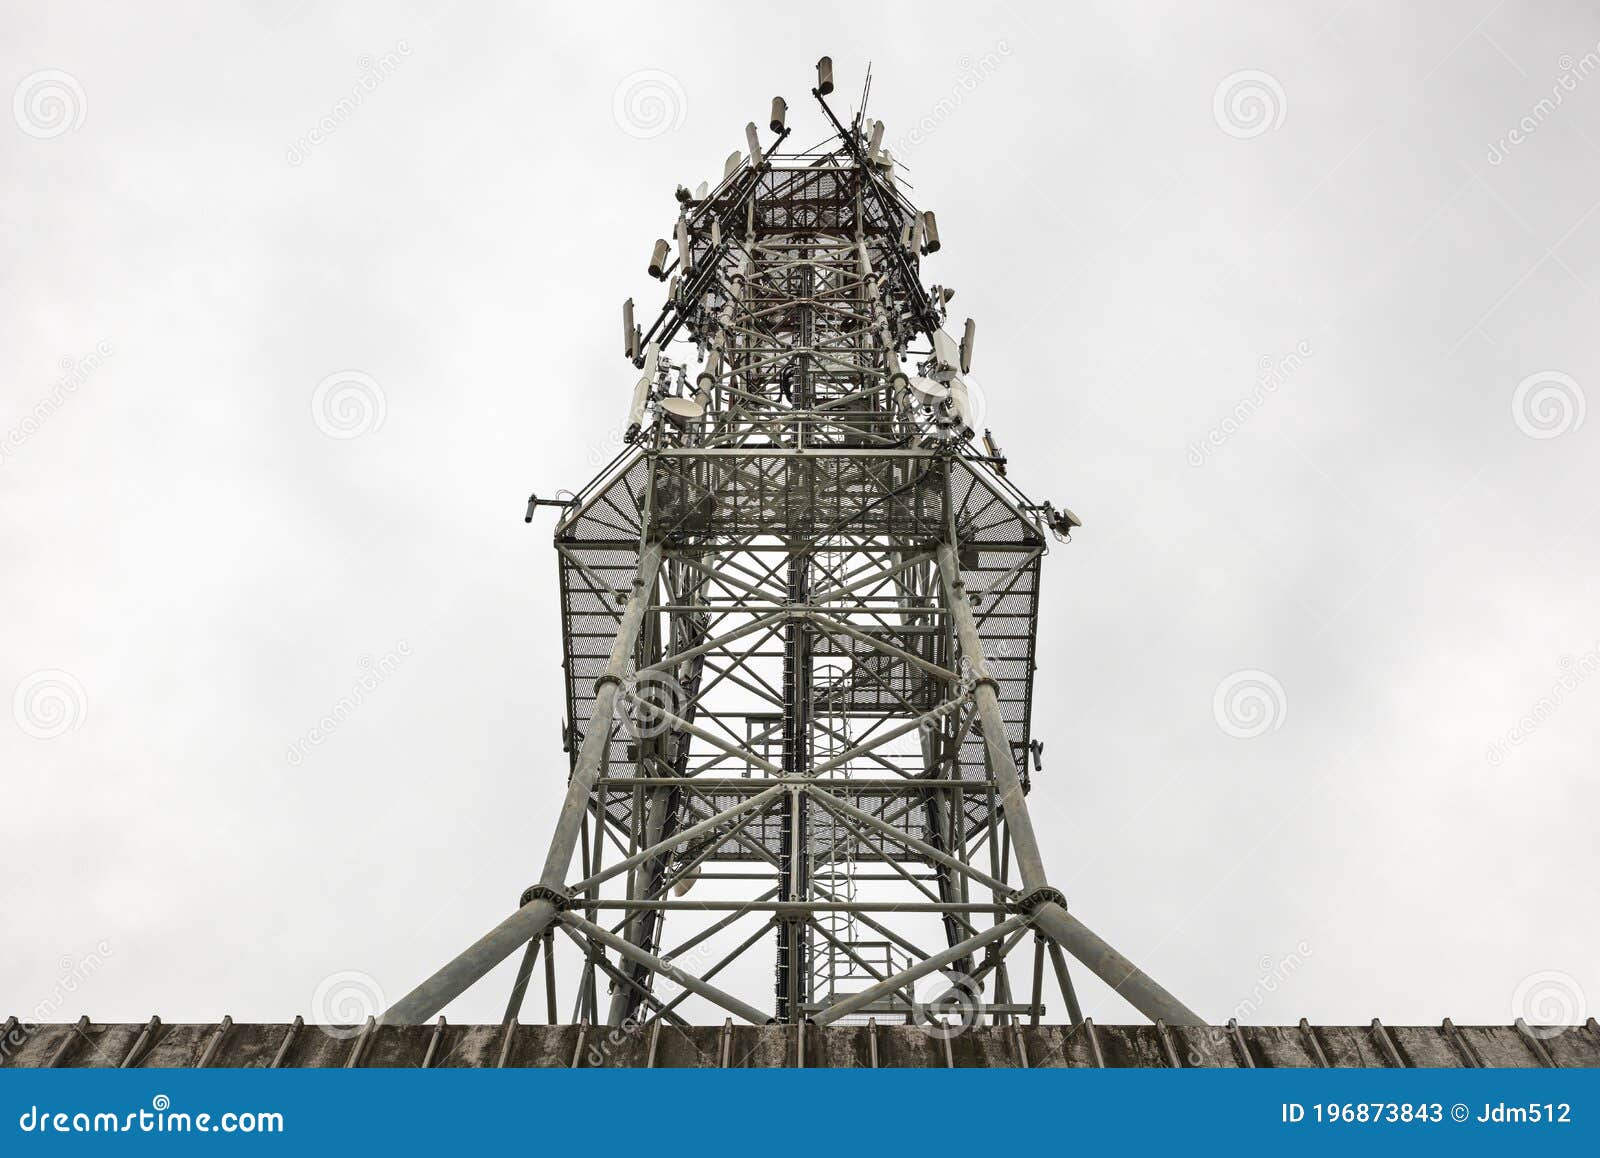 Top Of Antenna Used For Mobile Phones Cellular Radio Tower On A Cloudy Day Stock Image Image Of Industrial Operator 196873843